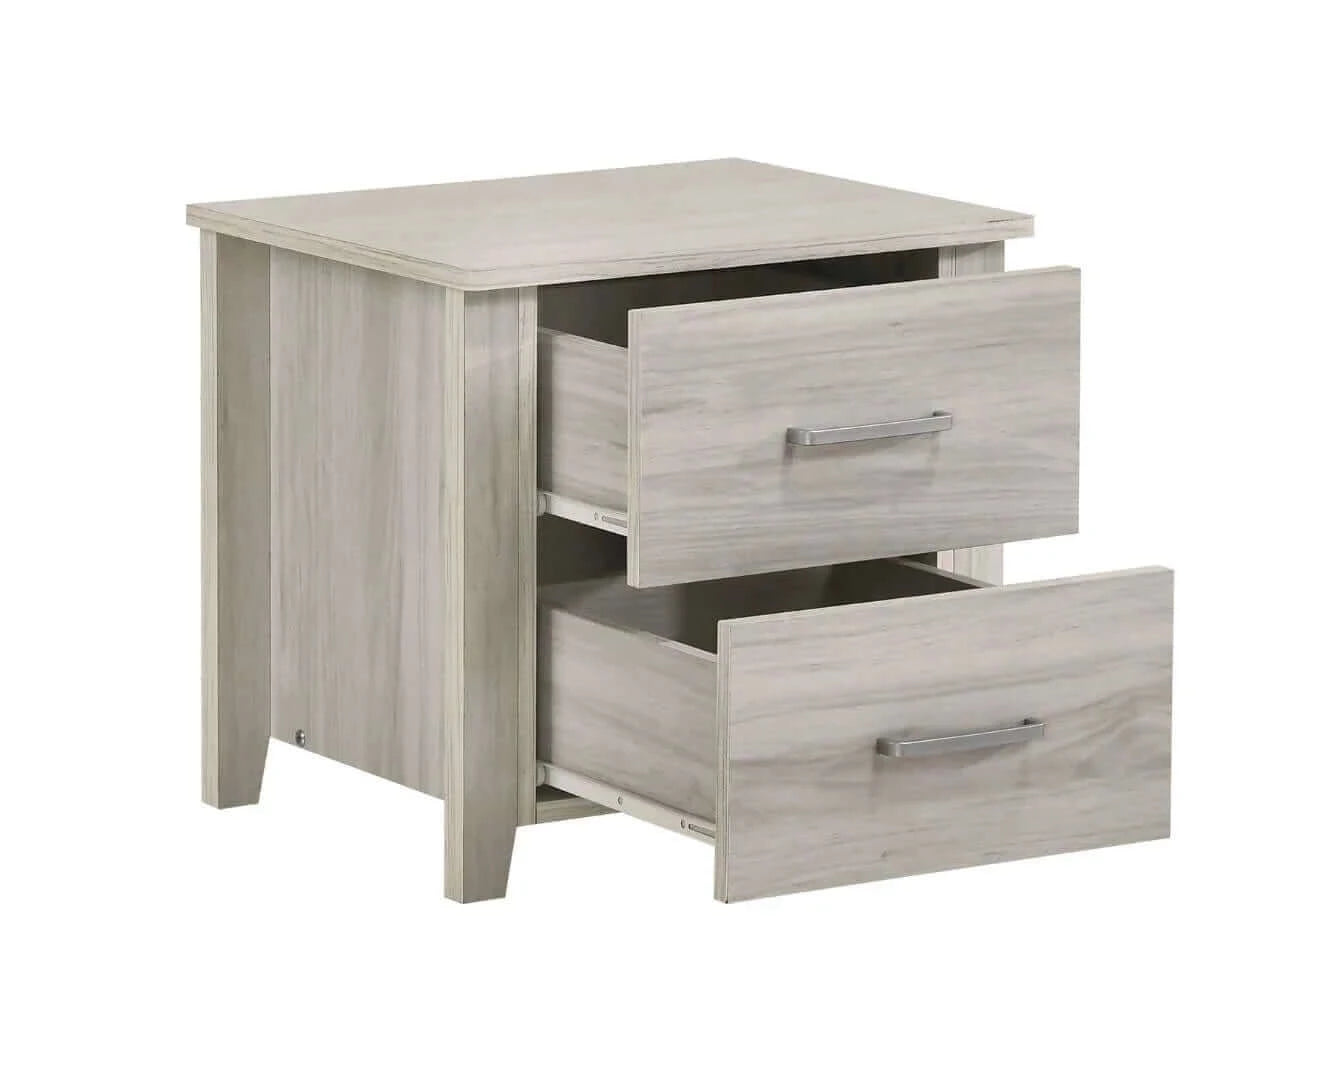 Add Charm to Your Bedroom - White Oak 2 Drawers Bedside Table-Upinteriors